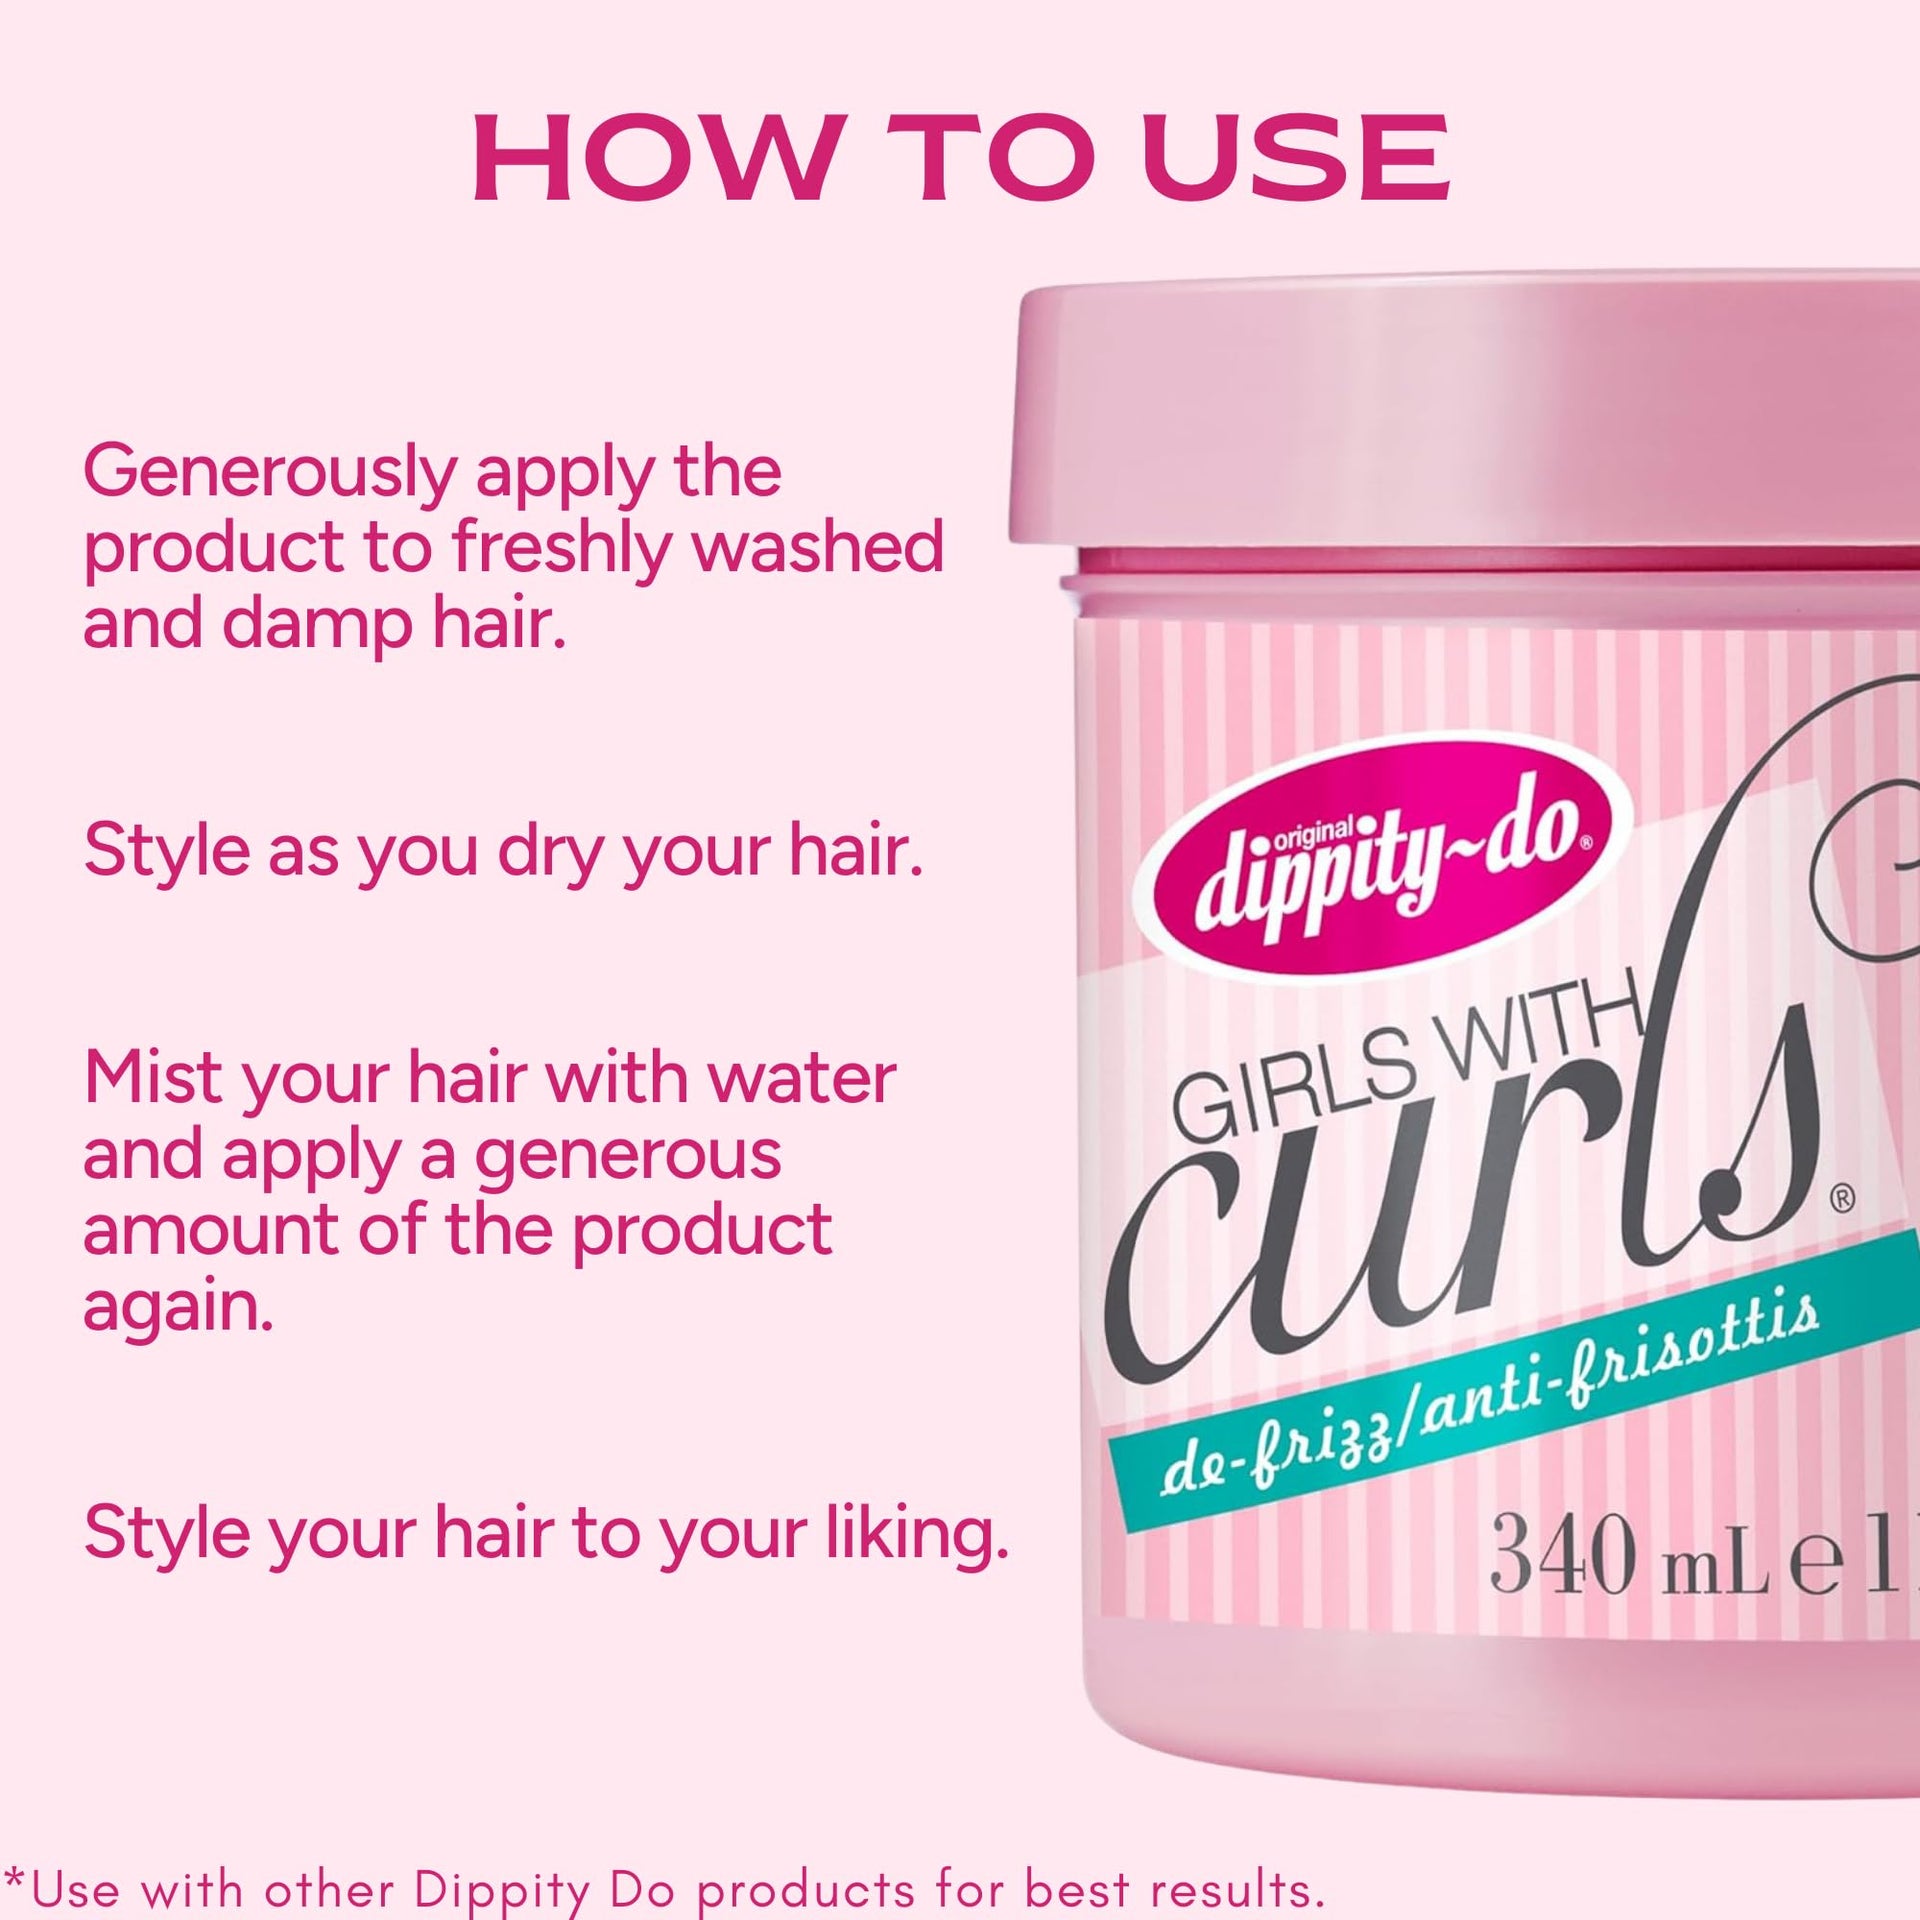 Dippity-Do Girls With Curls Curl Shaping Light Hold Gelee - 340ml